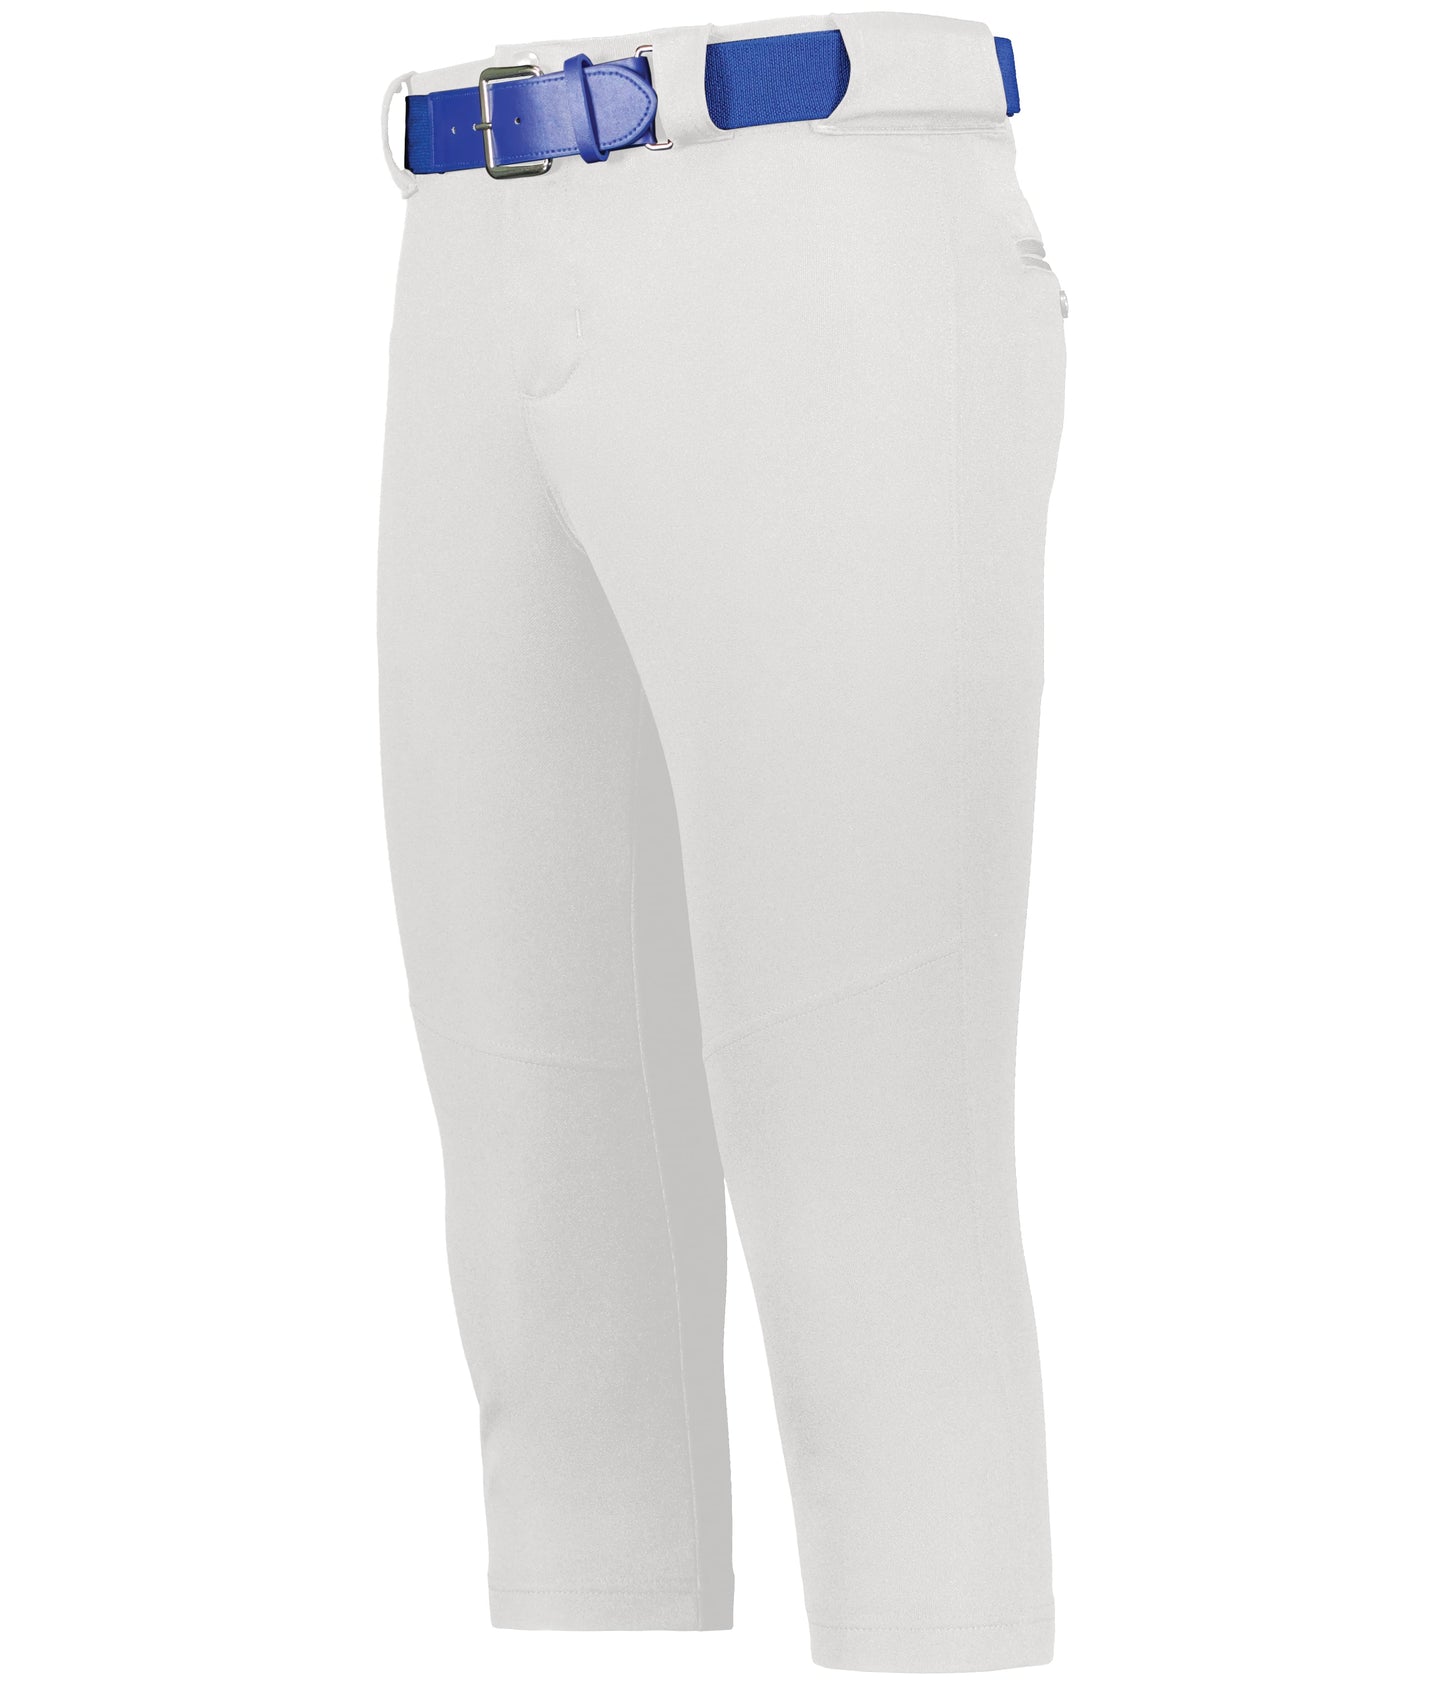 Ladies On Deck Softball Knicker Russell Rs5DBX